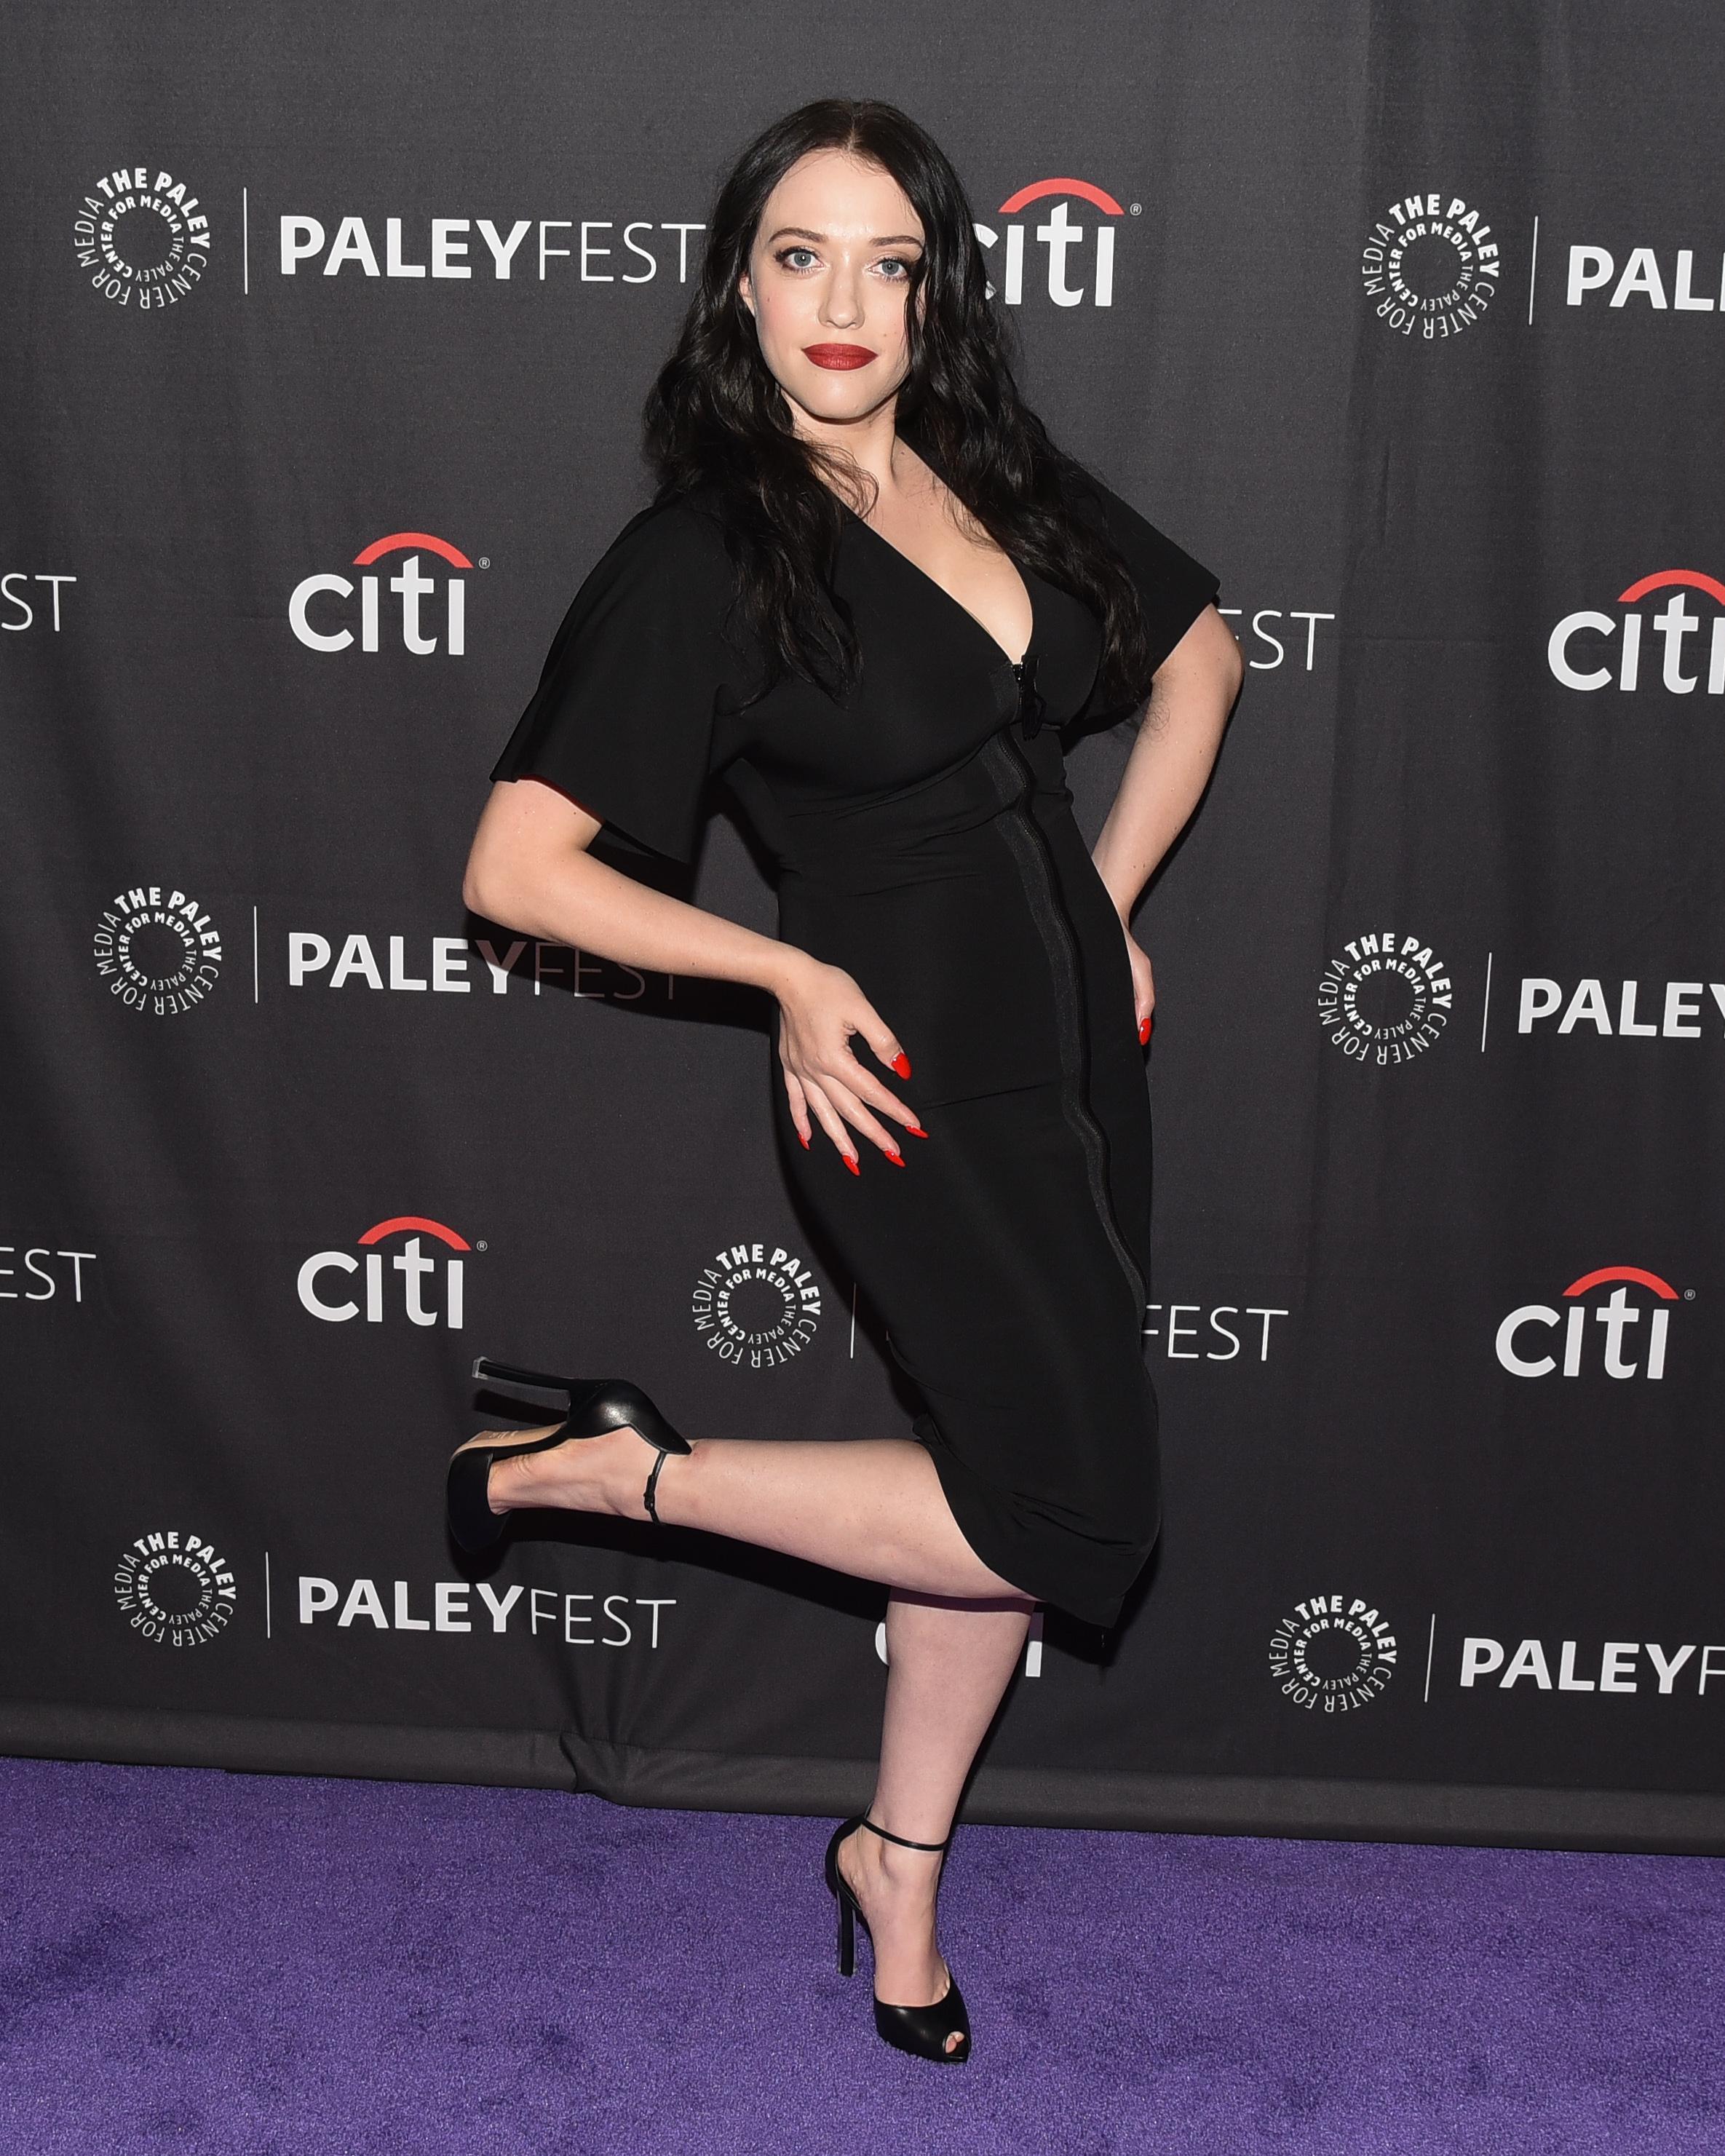 People who liked Kat Dennings's feet, also liked.